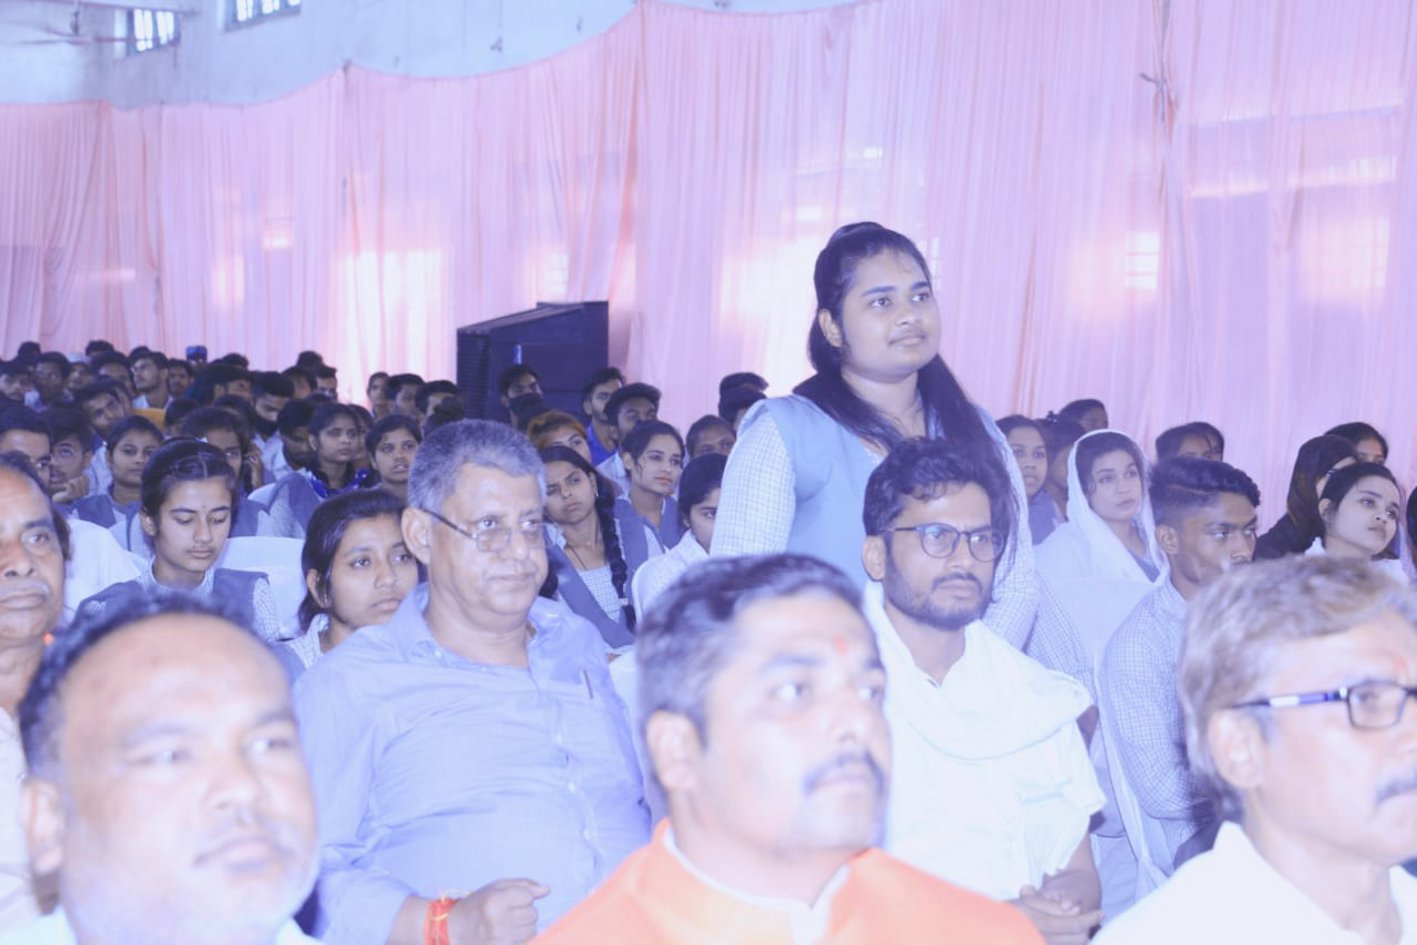 Kirti interacted with the CM, said - what is the plan of the government to provide employment to the youth